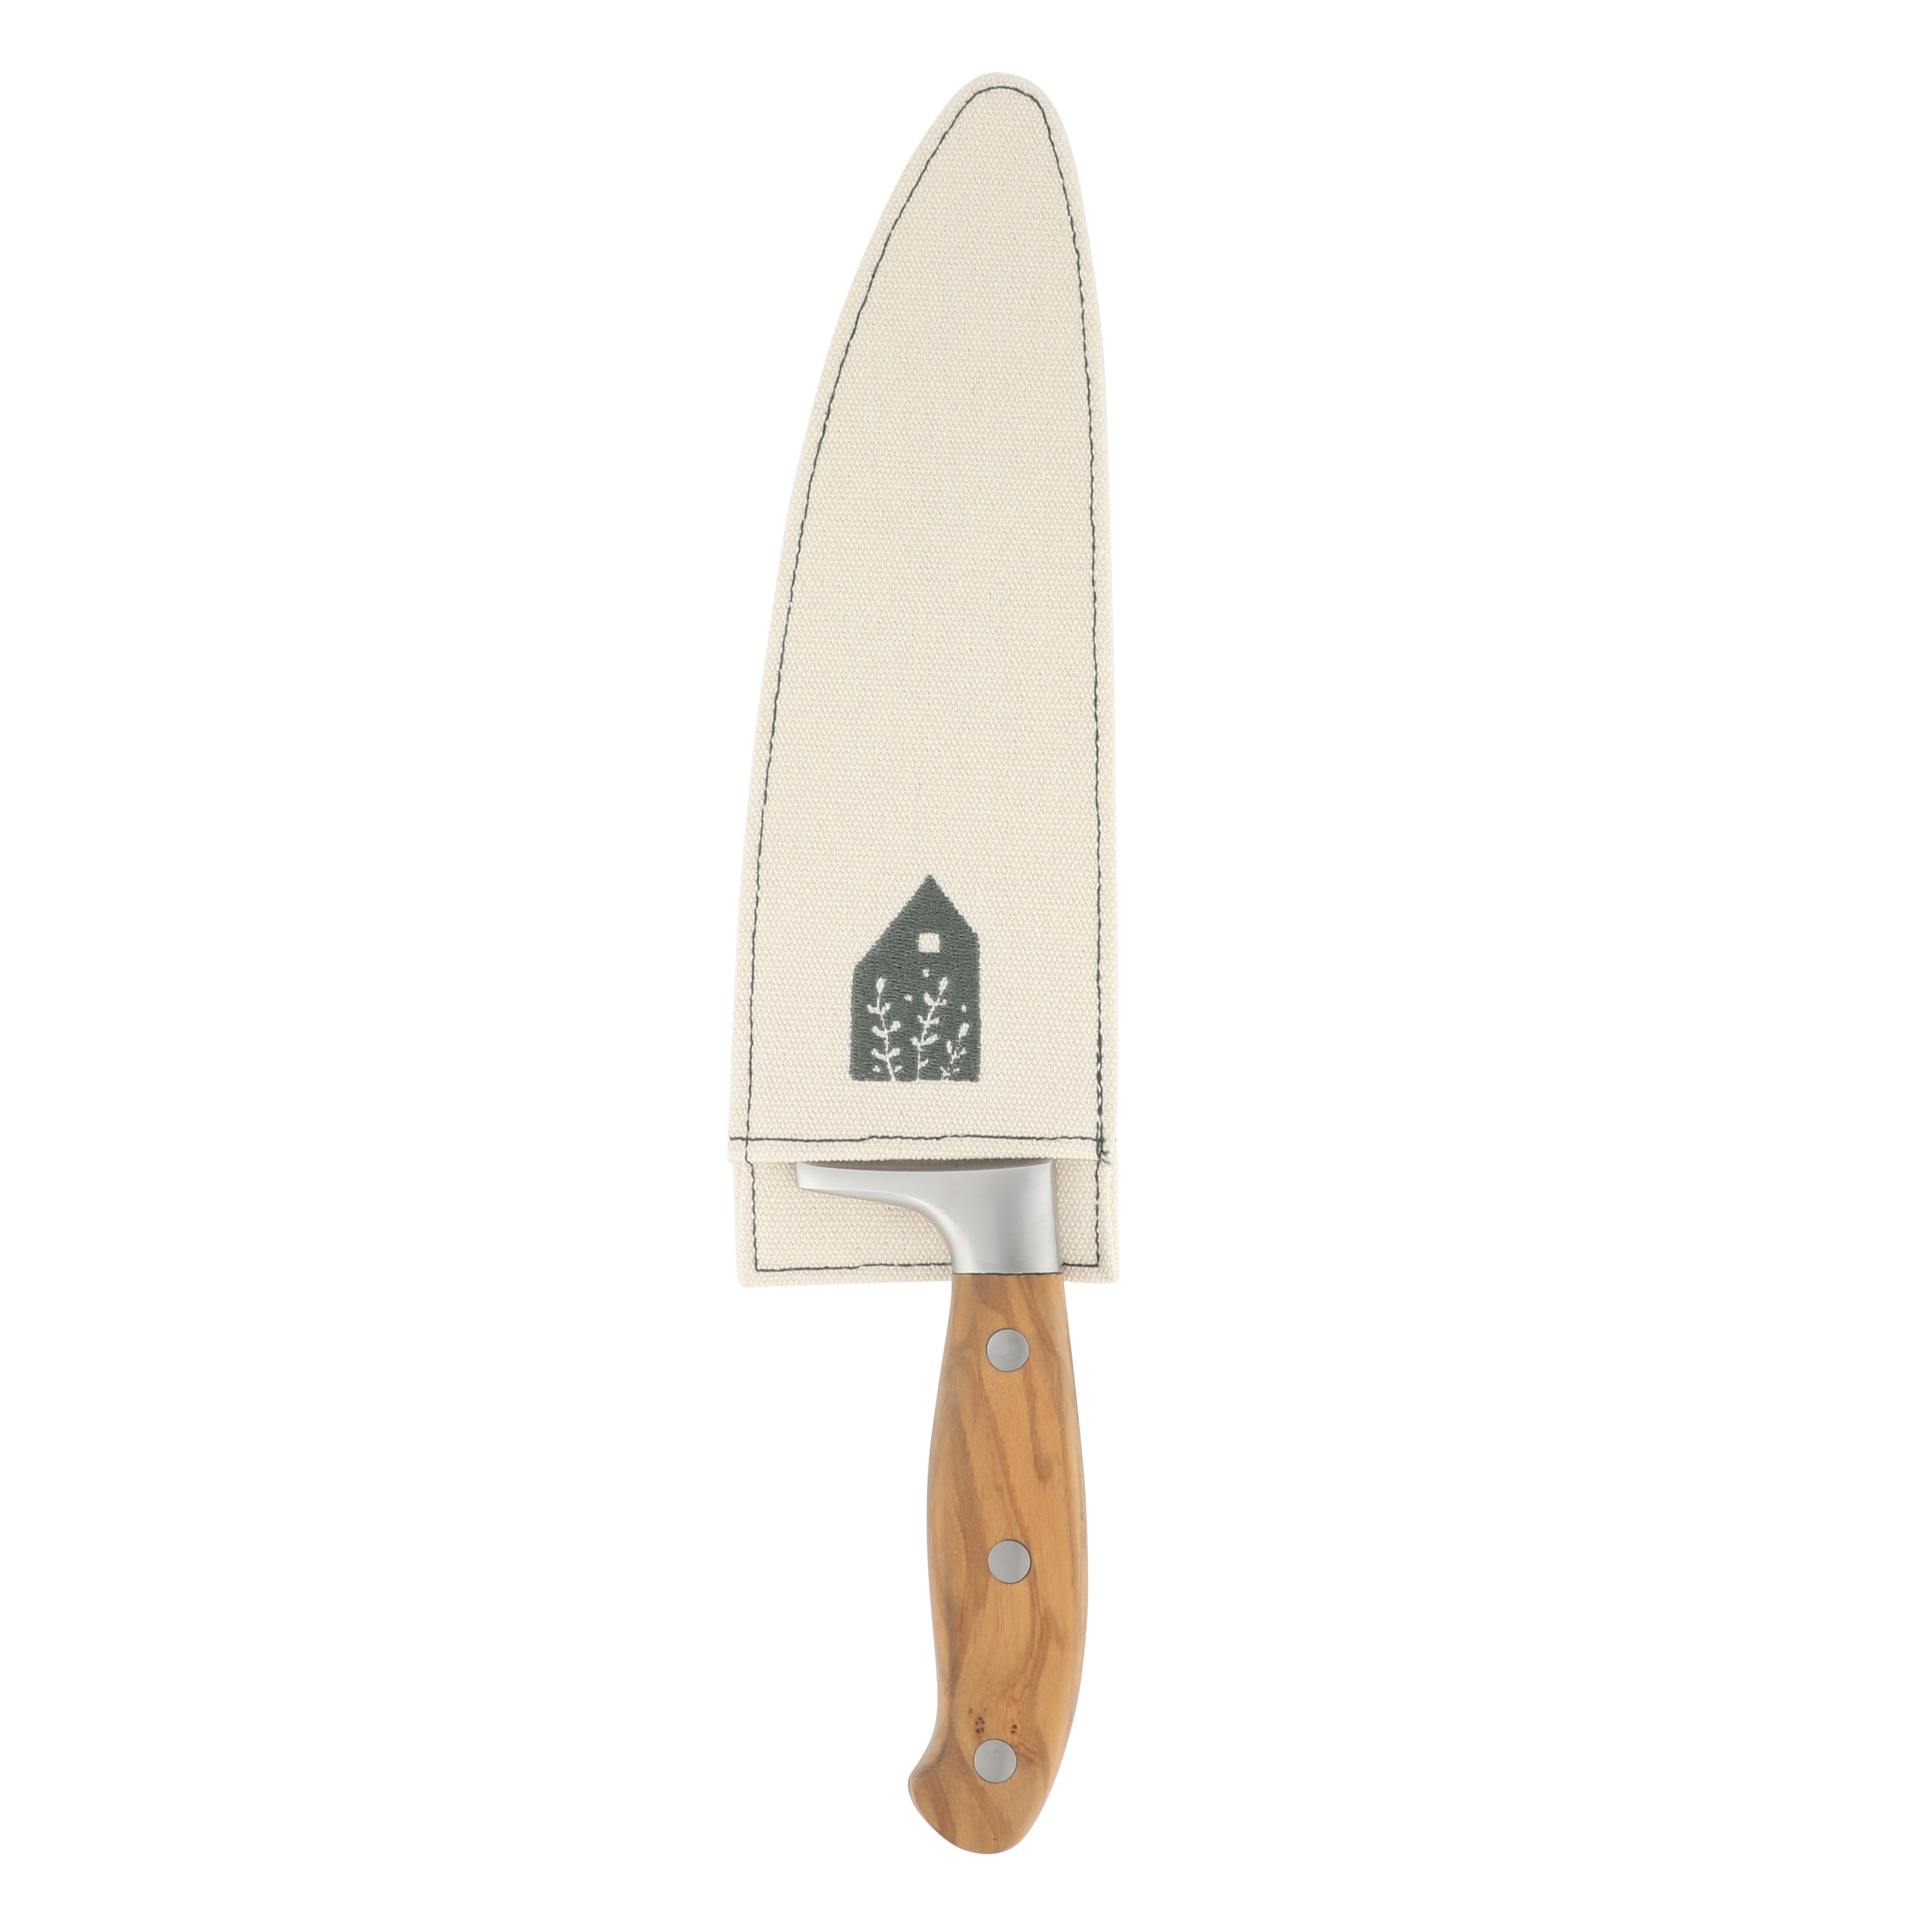 Bloomhouse 8 inch German Steel Chef Knife w/ Olive Wood Forged Handle